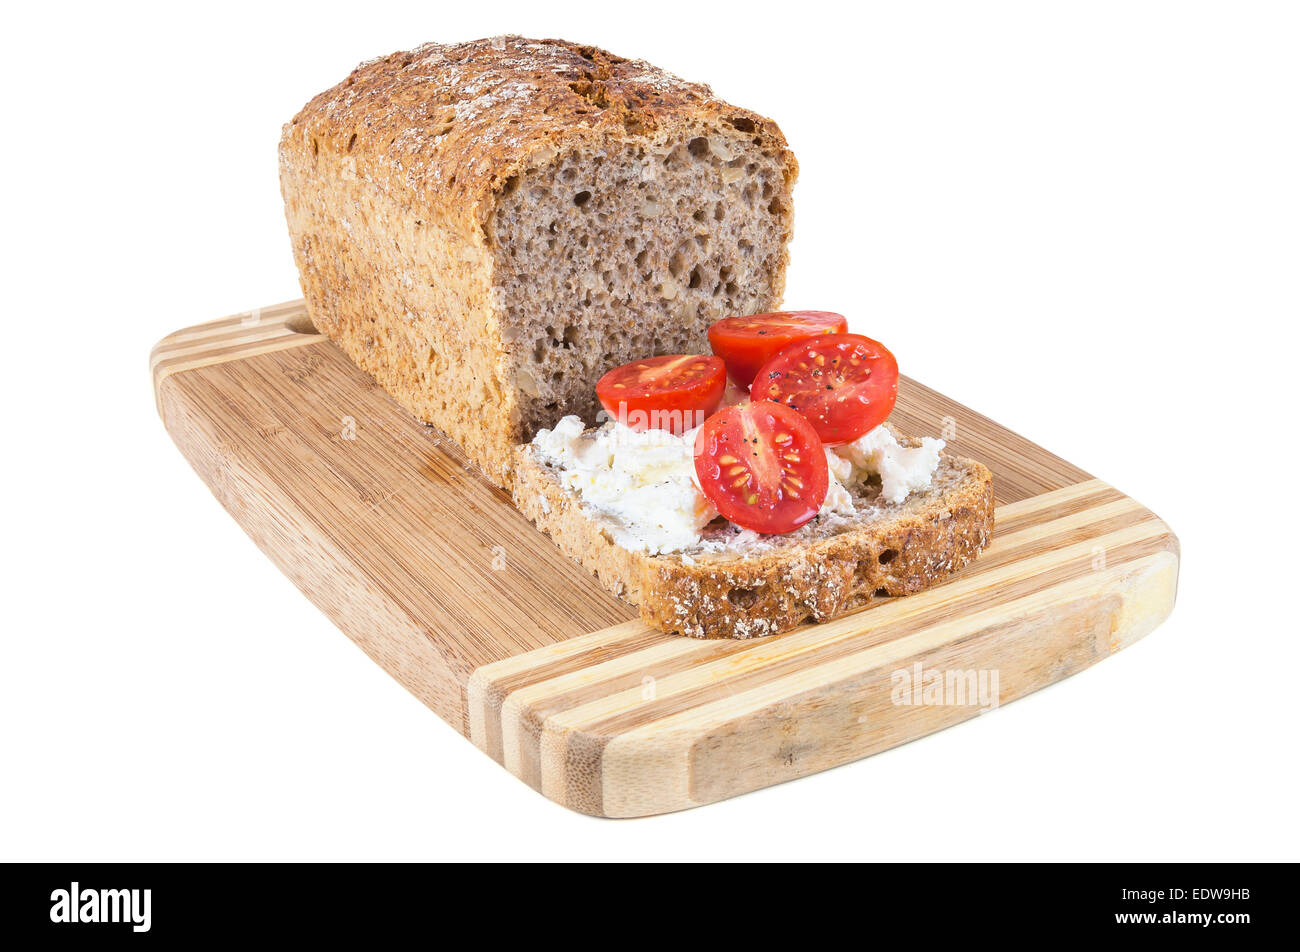 Closeup of slice of wholemeal bread with cottage cheese and cherry tomatoes Stock Photo